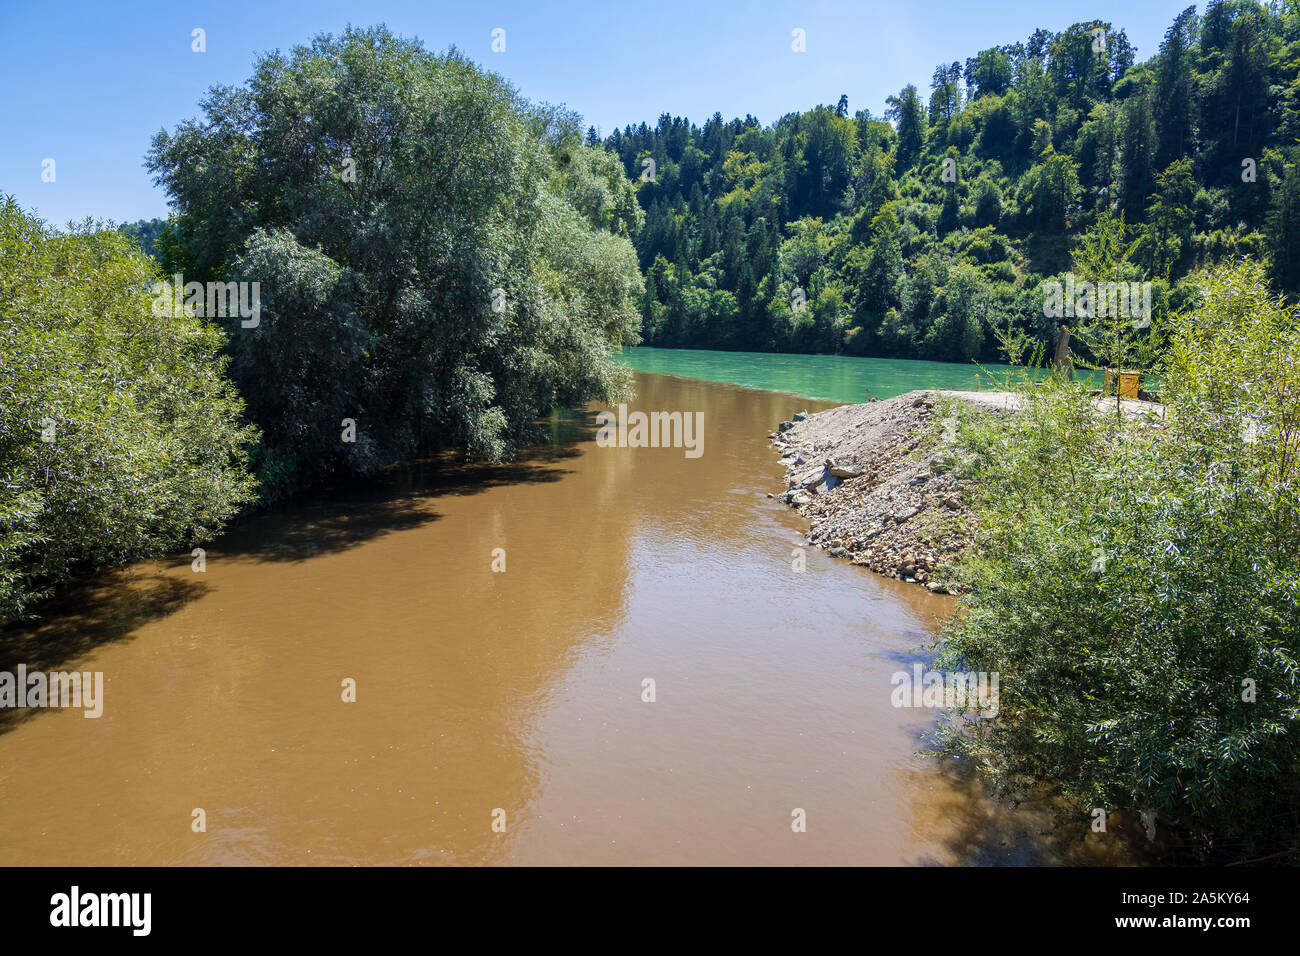 Lavamund, Austria - August 09, 2019: The confluence of the Lavant and Drava rivers. Memorial dedicated to flood marks in Lavamund, Carinthia Austria Stock Photo